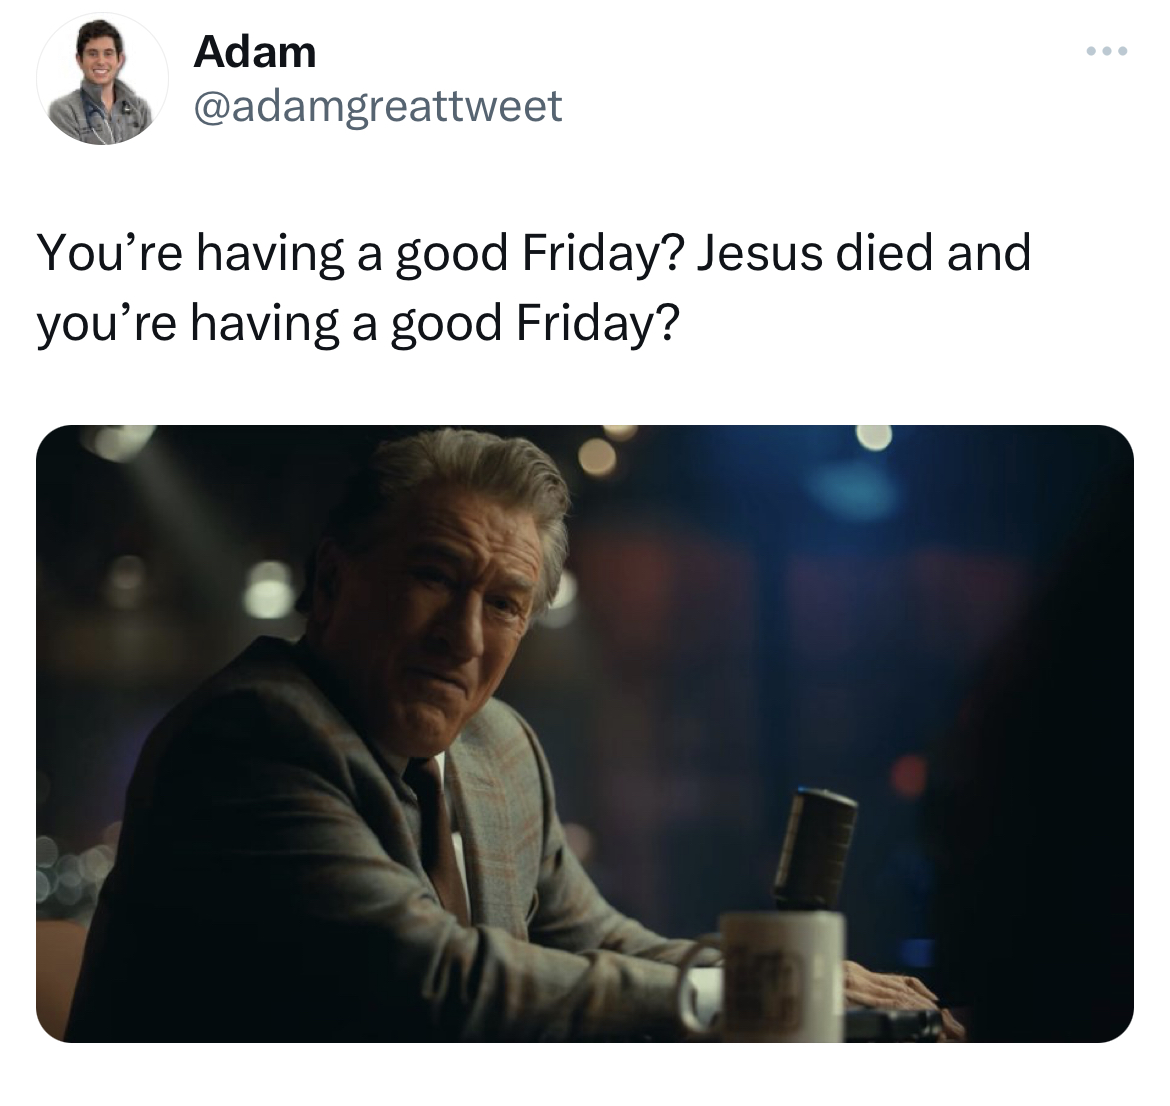 savage and salty tweets - presentation - Adam You're having a good Friday? Jesus died and you're having a good Friday?